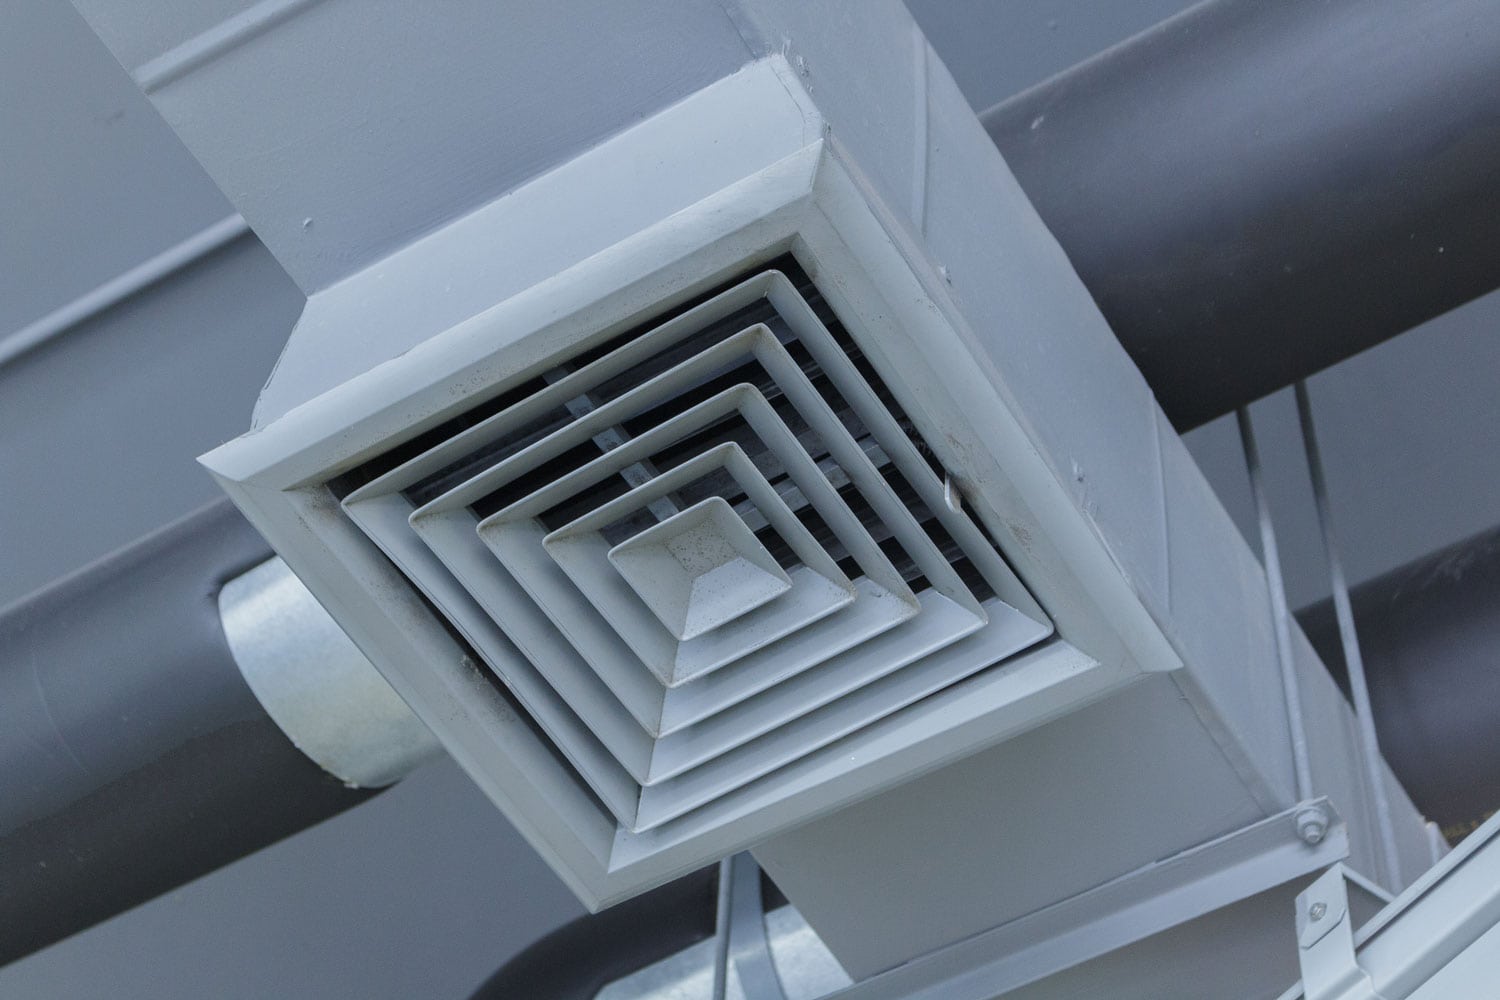 Air duct vents with low airflow creates increased pressure of heat